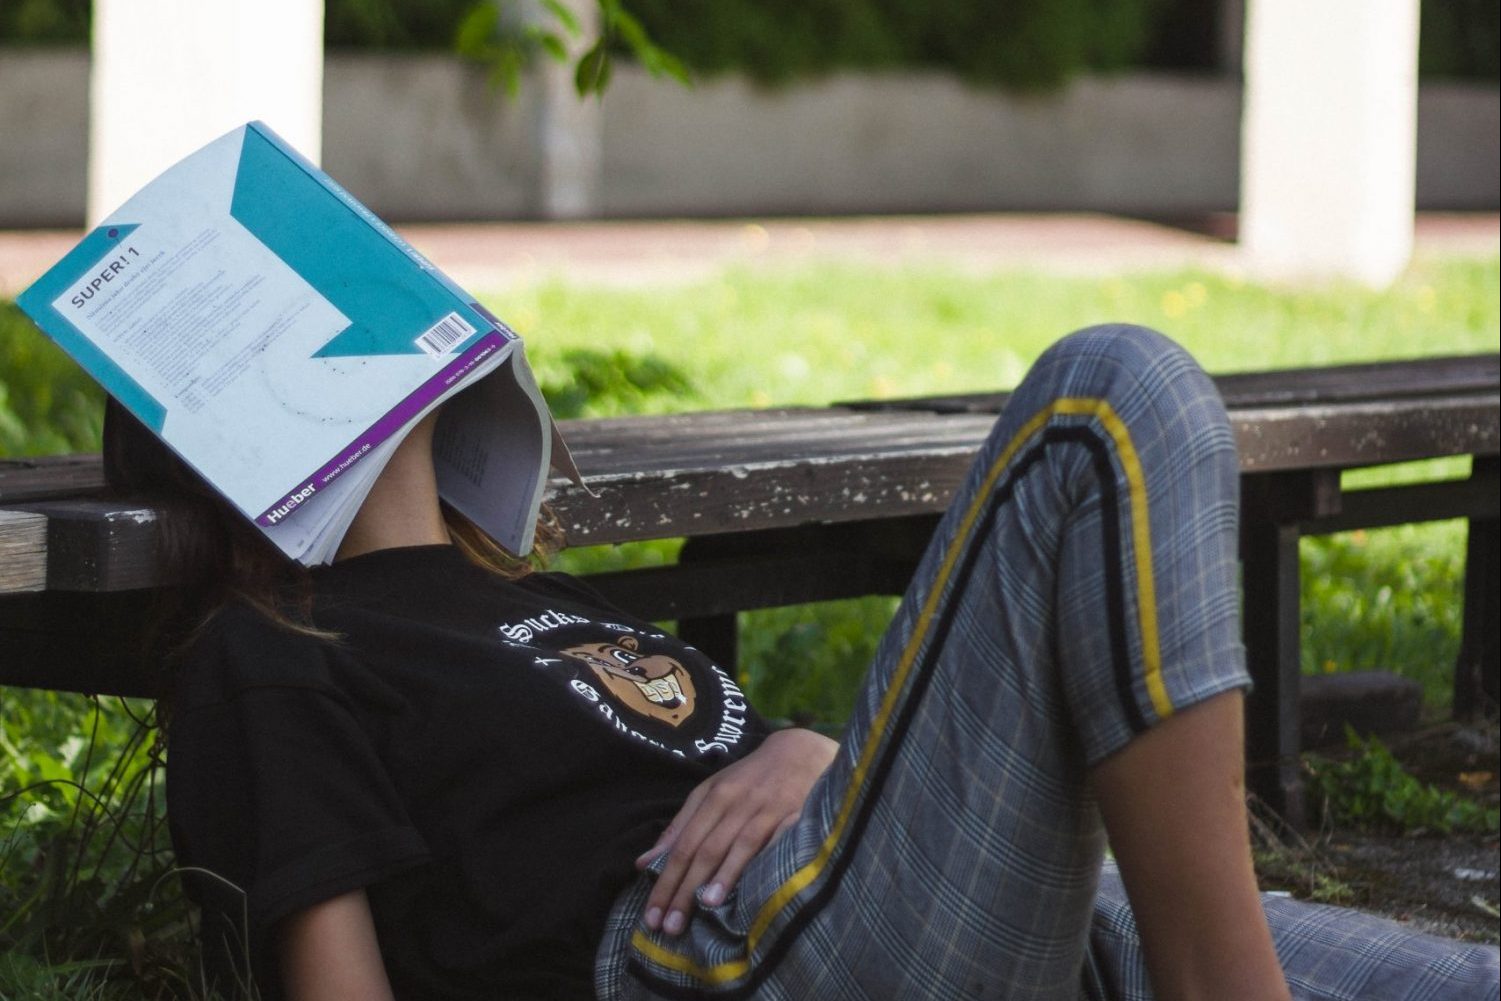 student taking a study break by sleeping with an open book on their face